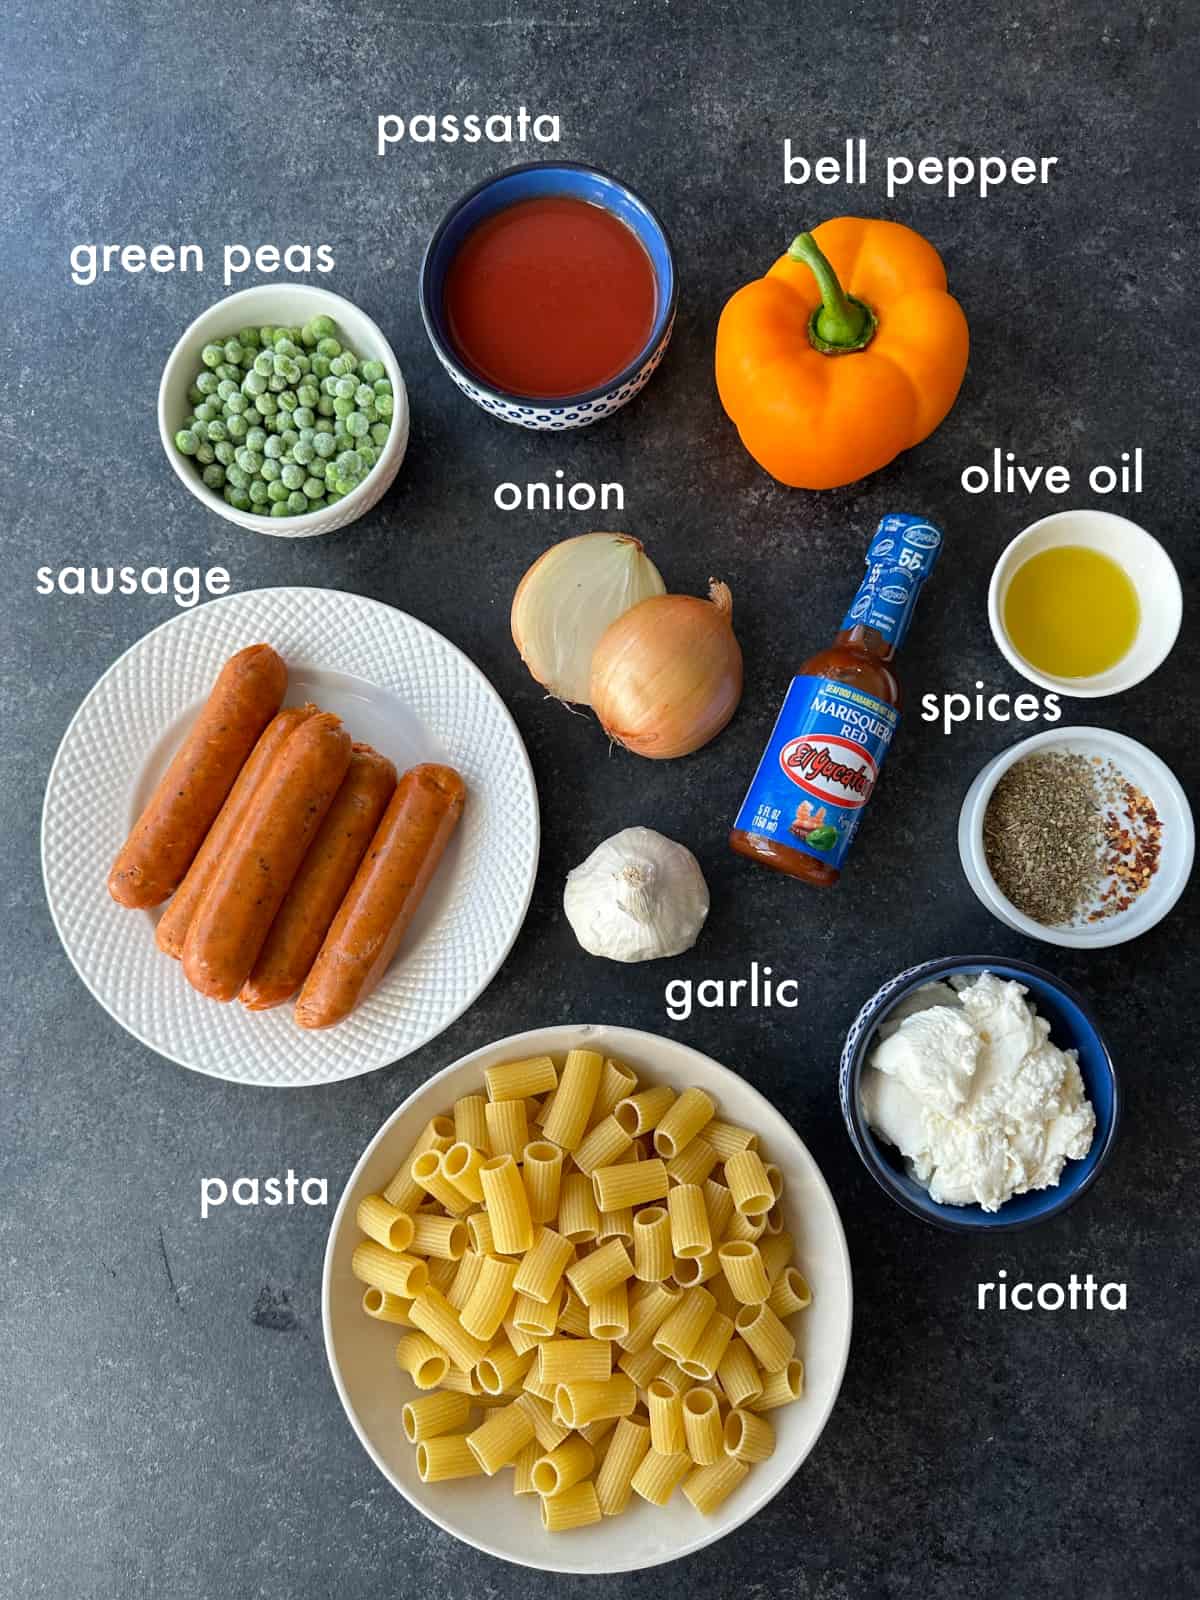 To make this recipe you need pasta, sausage, vegetables, spices, passata, hot sauce, and ricotta. 